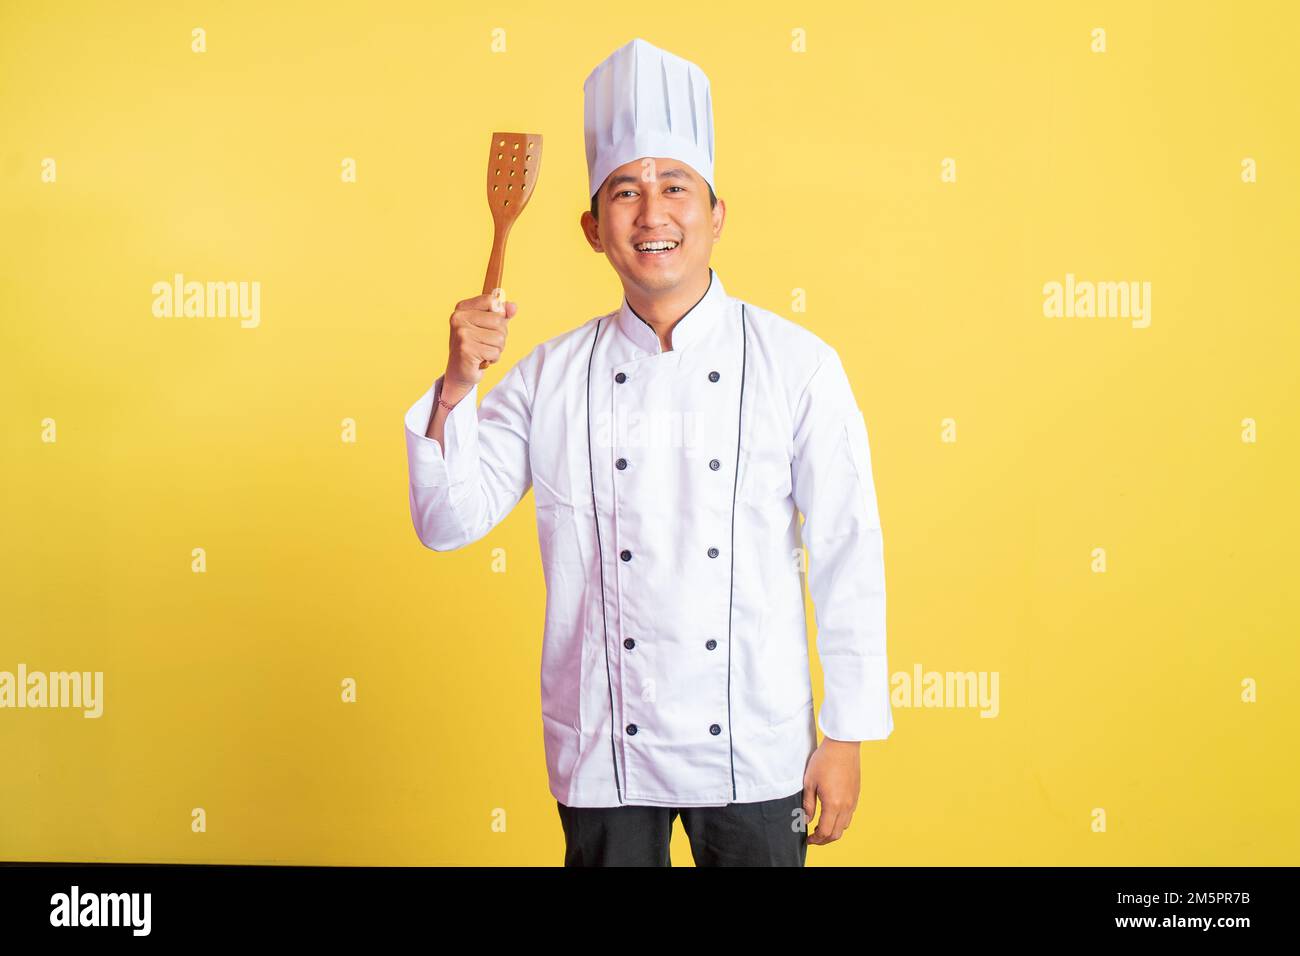 excited male chef wearing a chef jacket holding a spatula Stock Photo